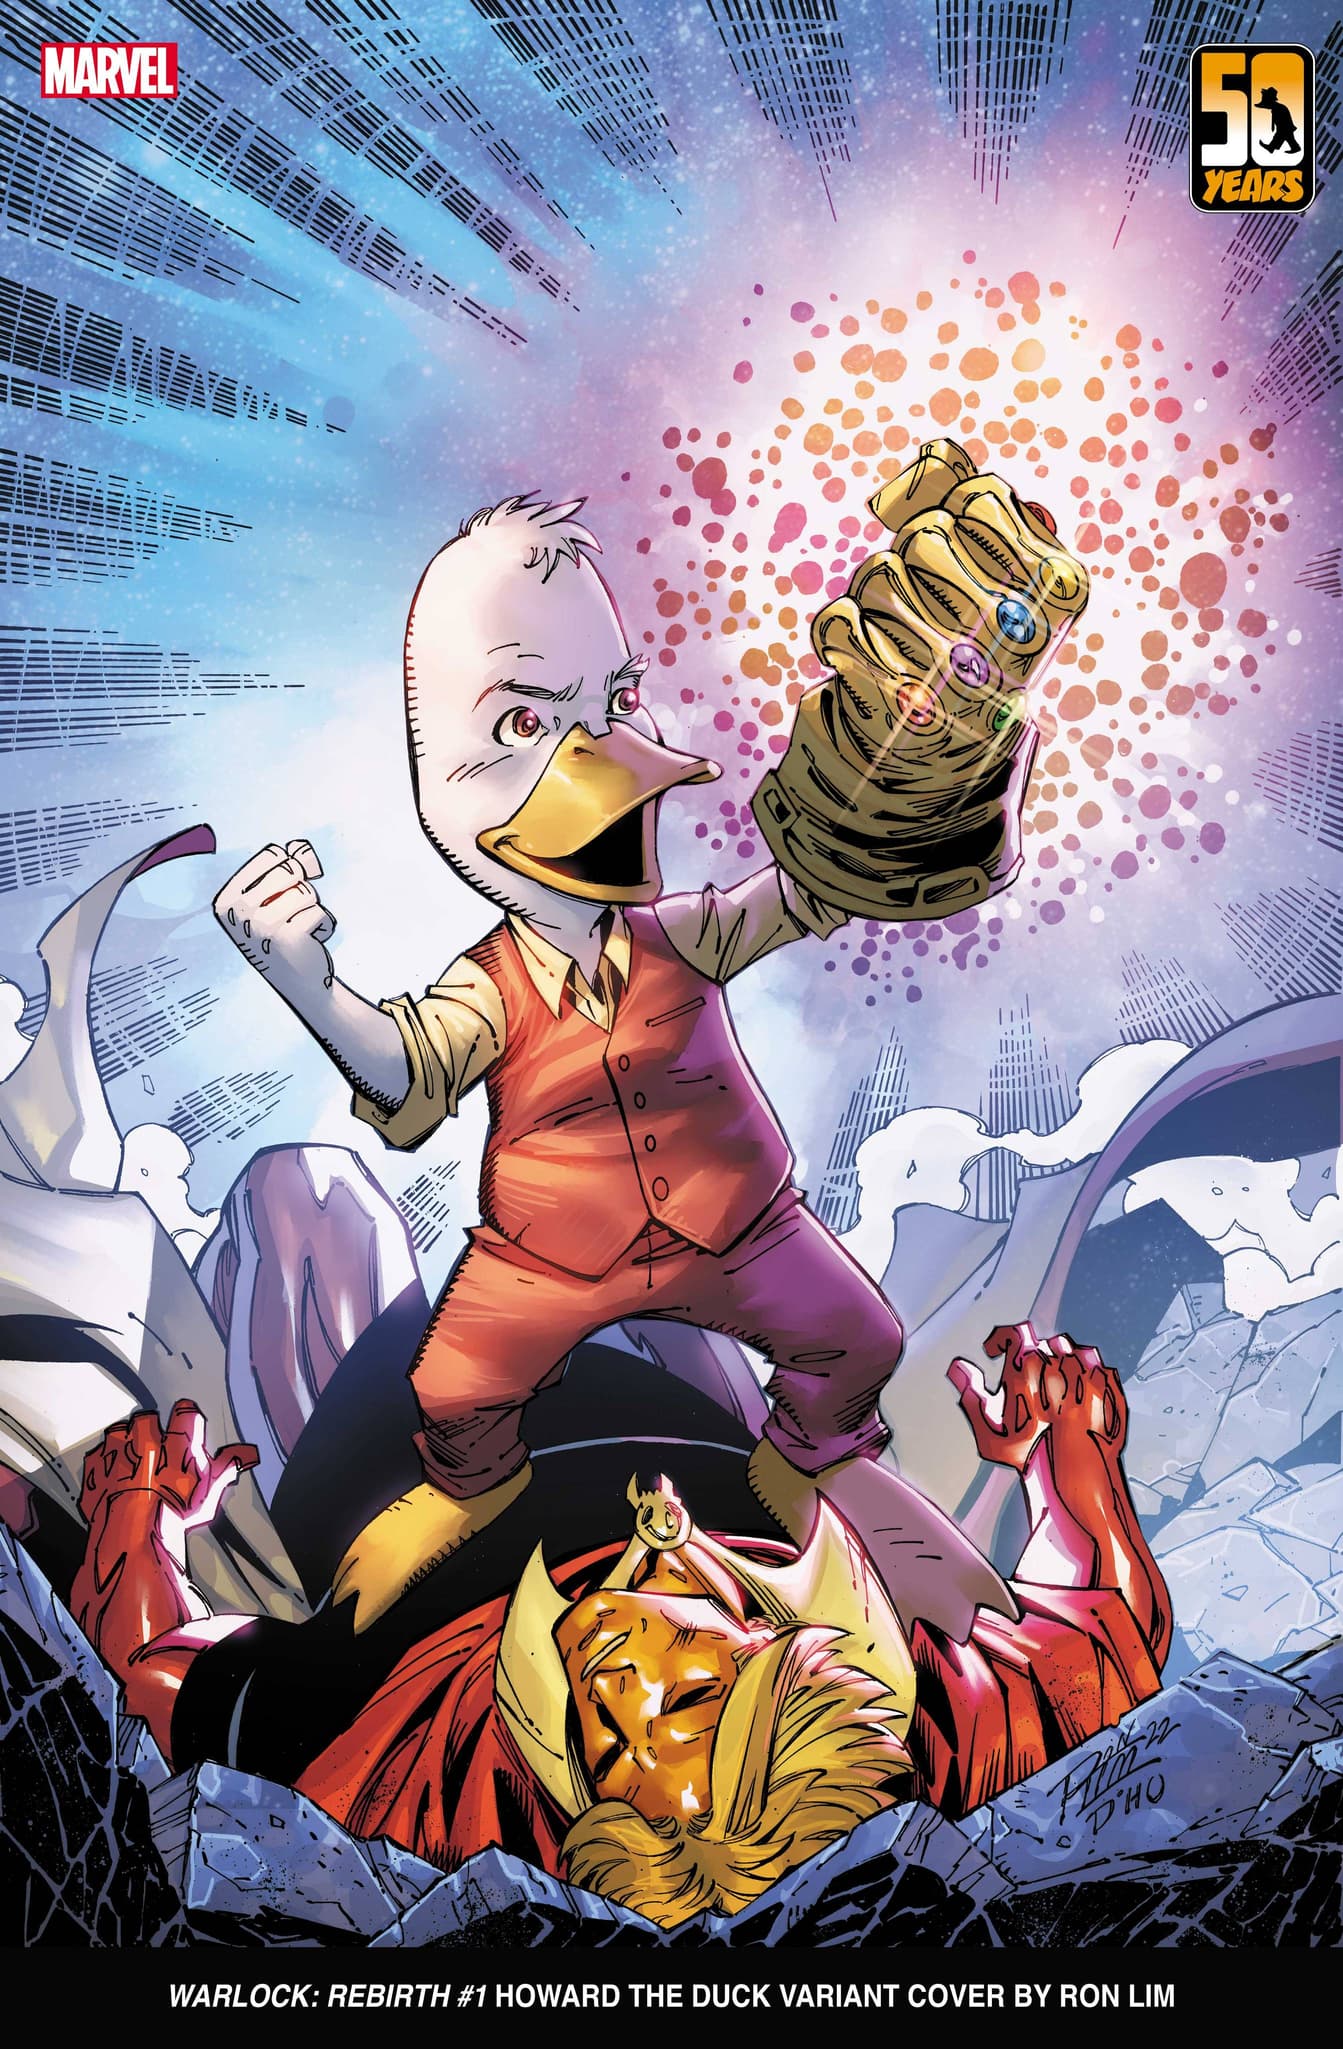 WARLOCK: REBIRTH #1 Howard the Duck Variant Cover by Ron Lim